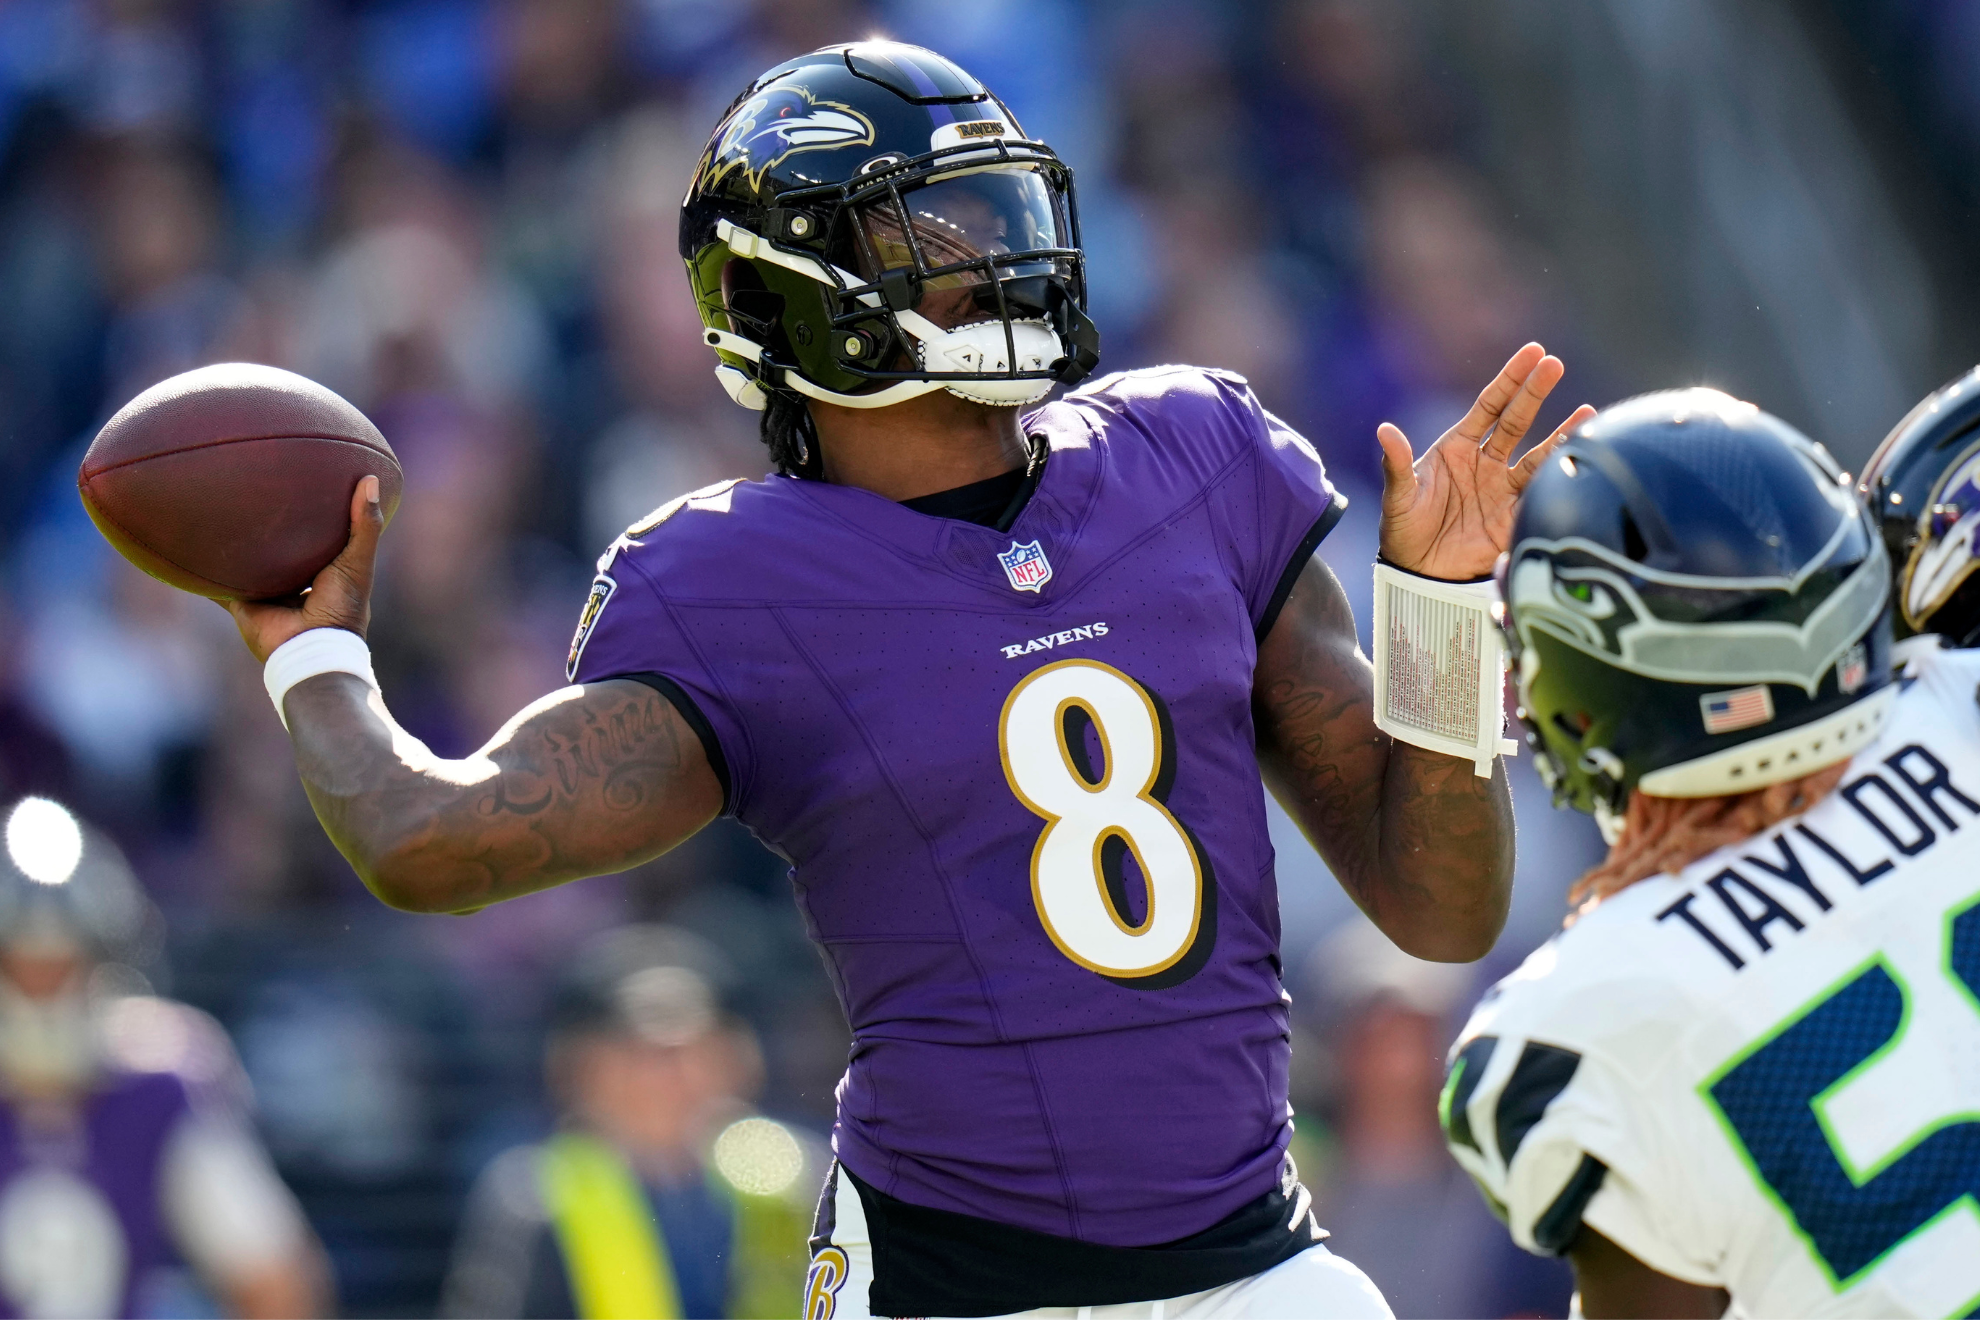 Lamar Jackson has thrown nine touchdowns to three interceptions while leading the NFL in completion rate.